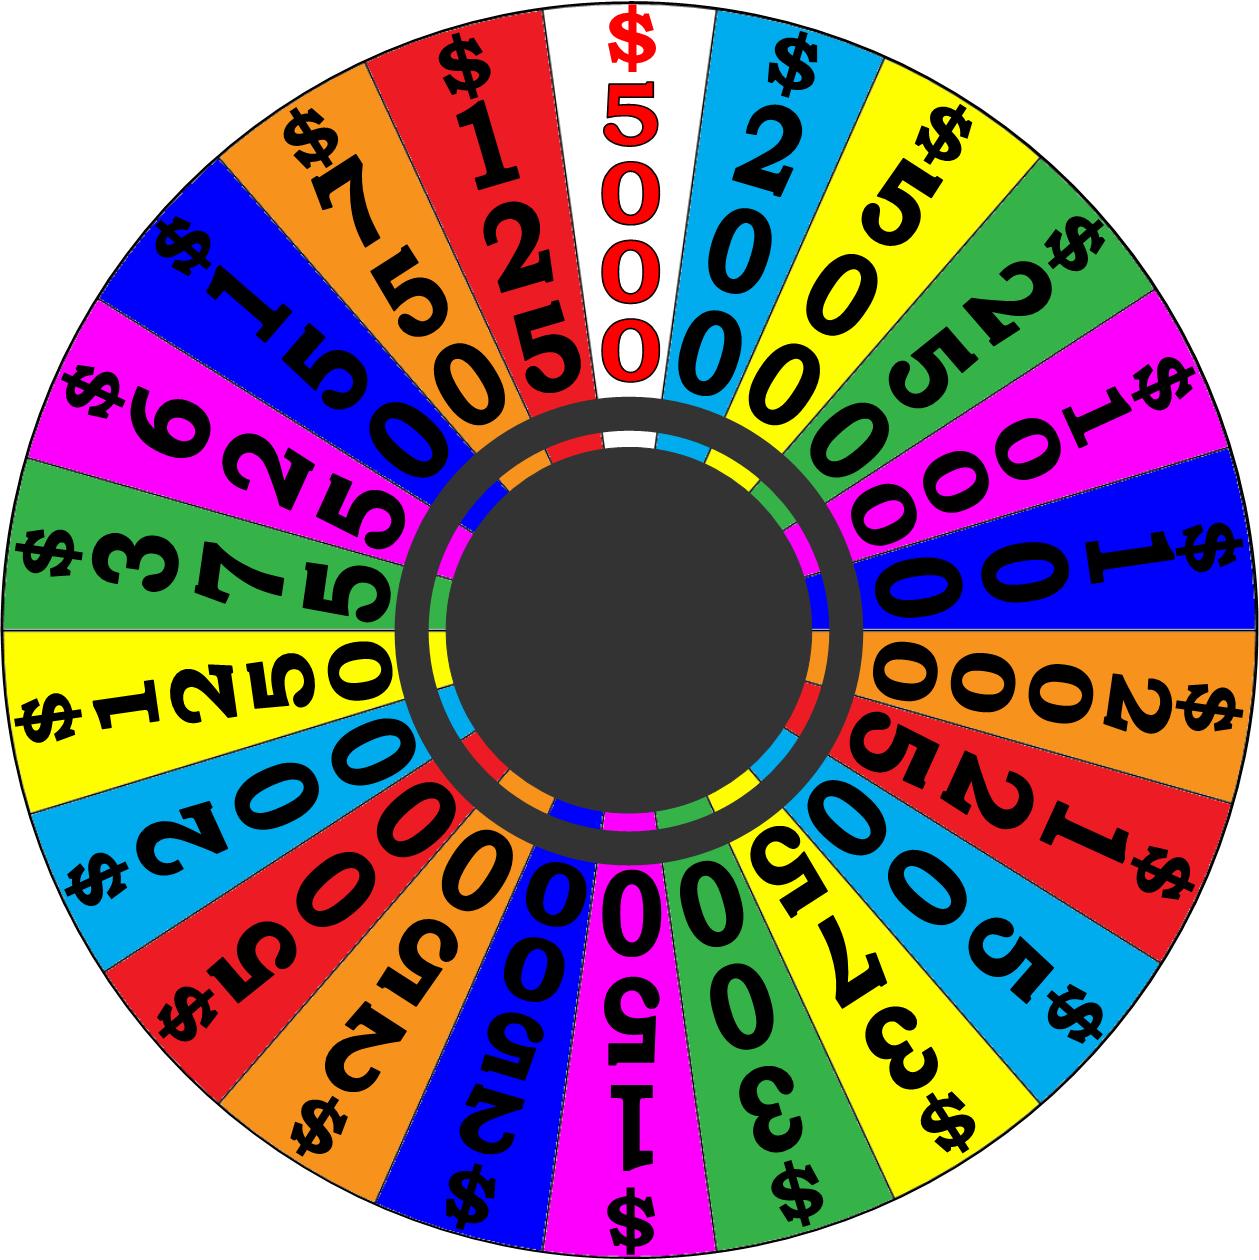 Wheel of Fortune Slots 2 by germanname